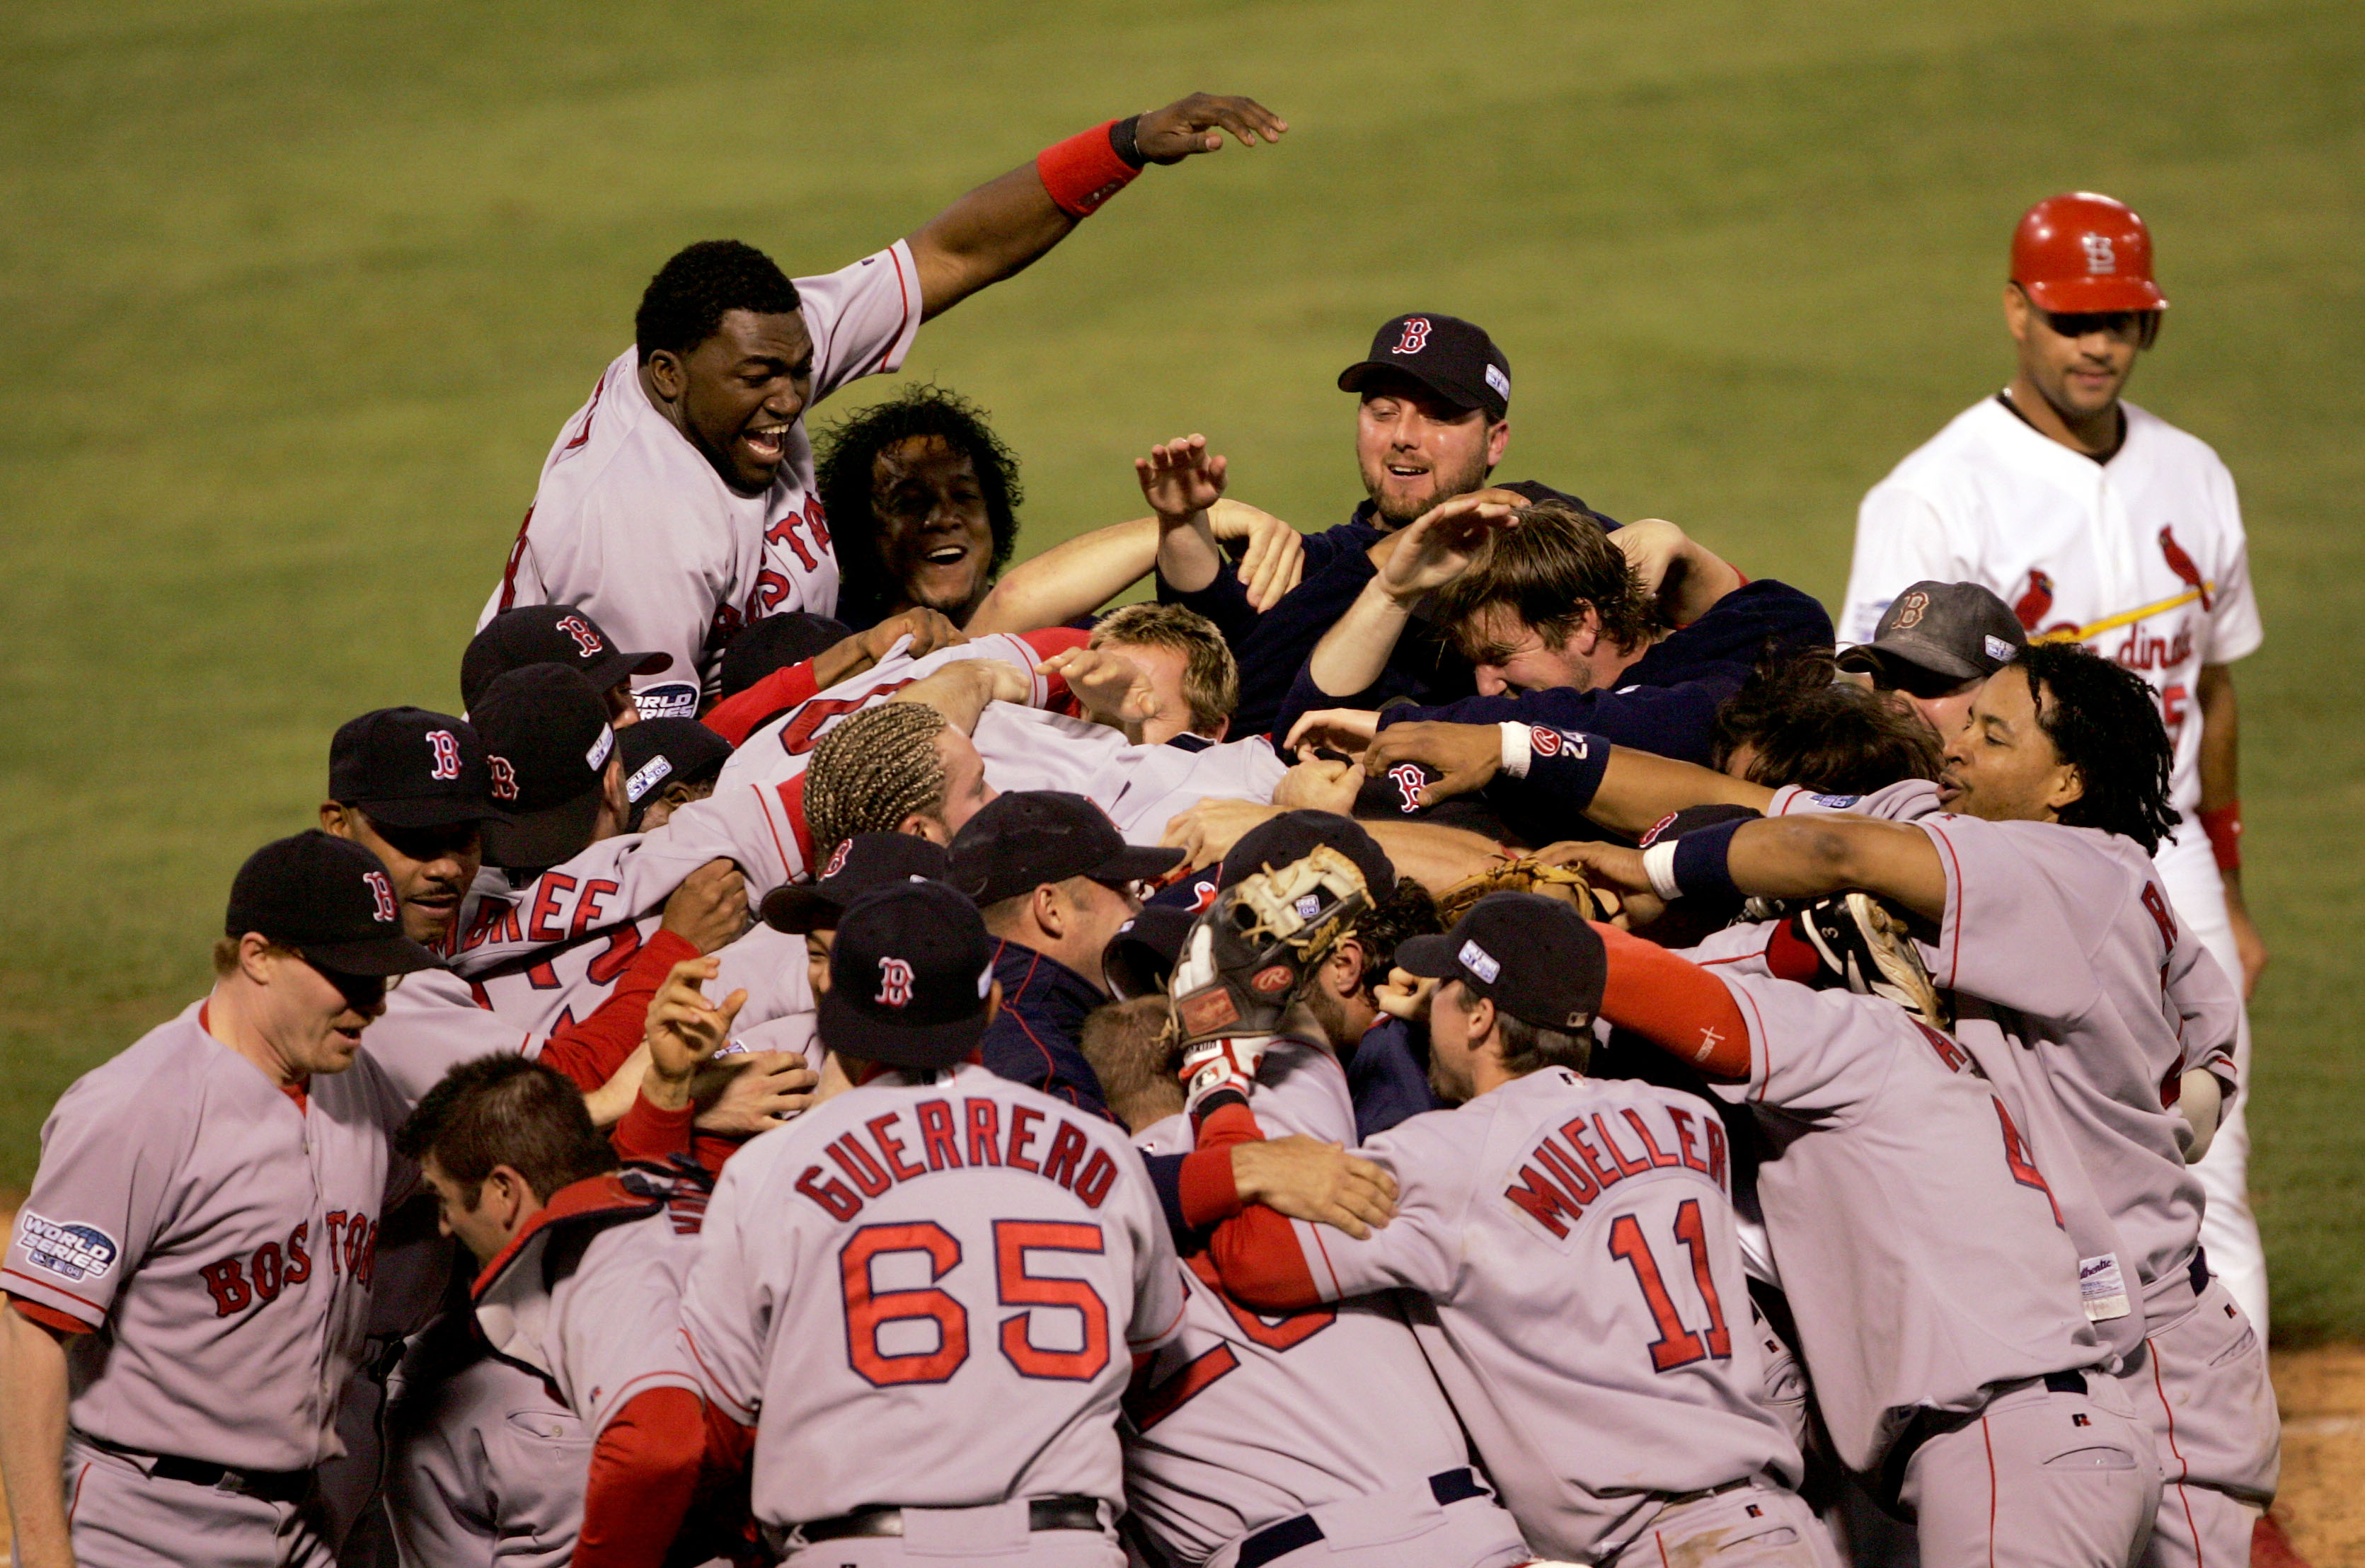 What's the best year for Boston sports in the last two decades?